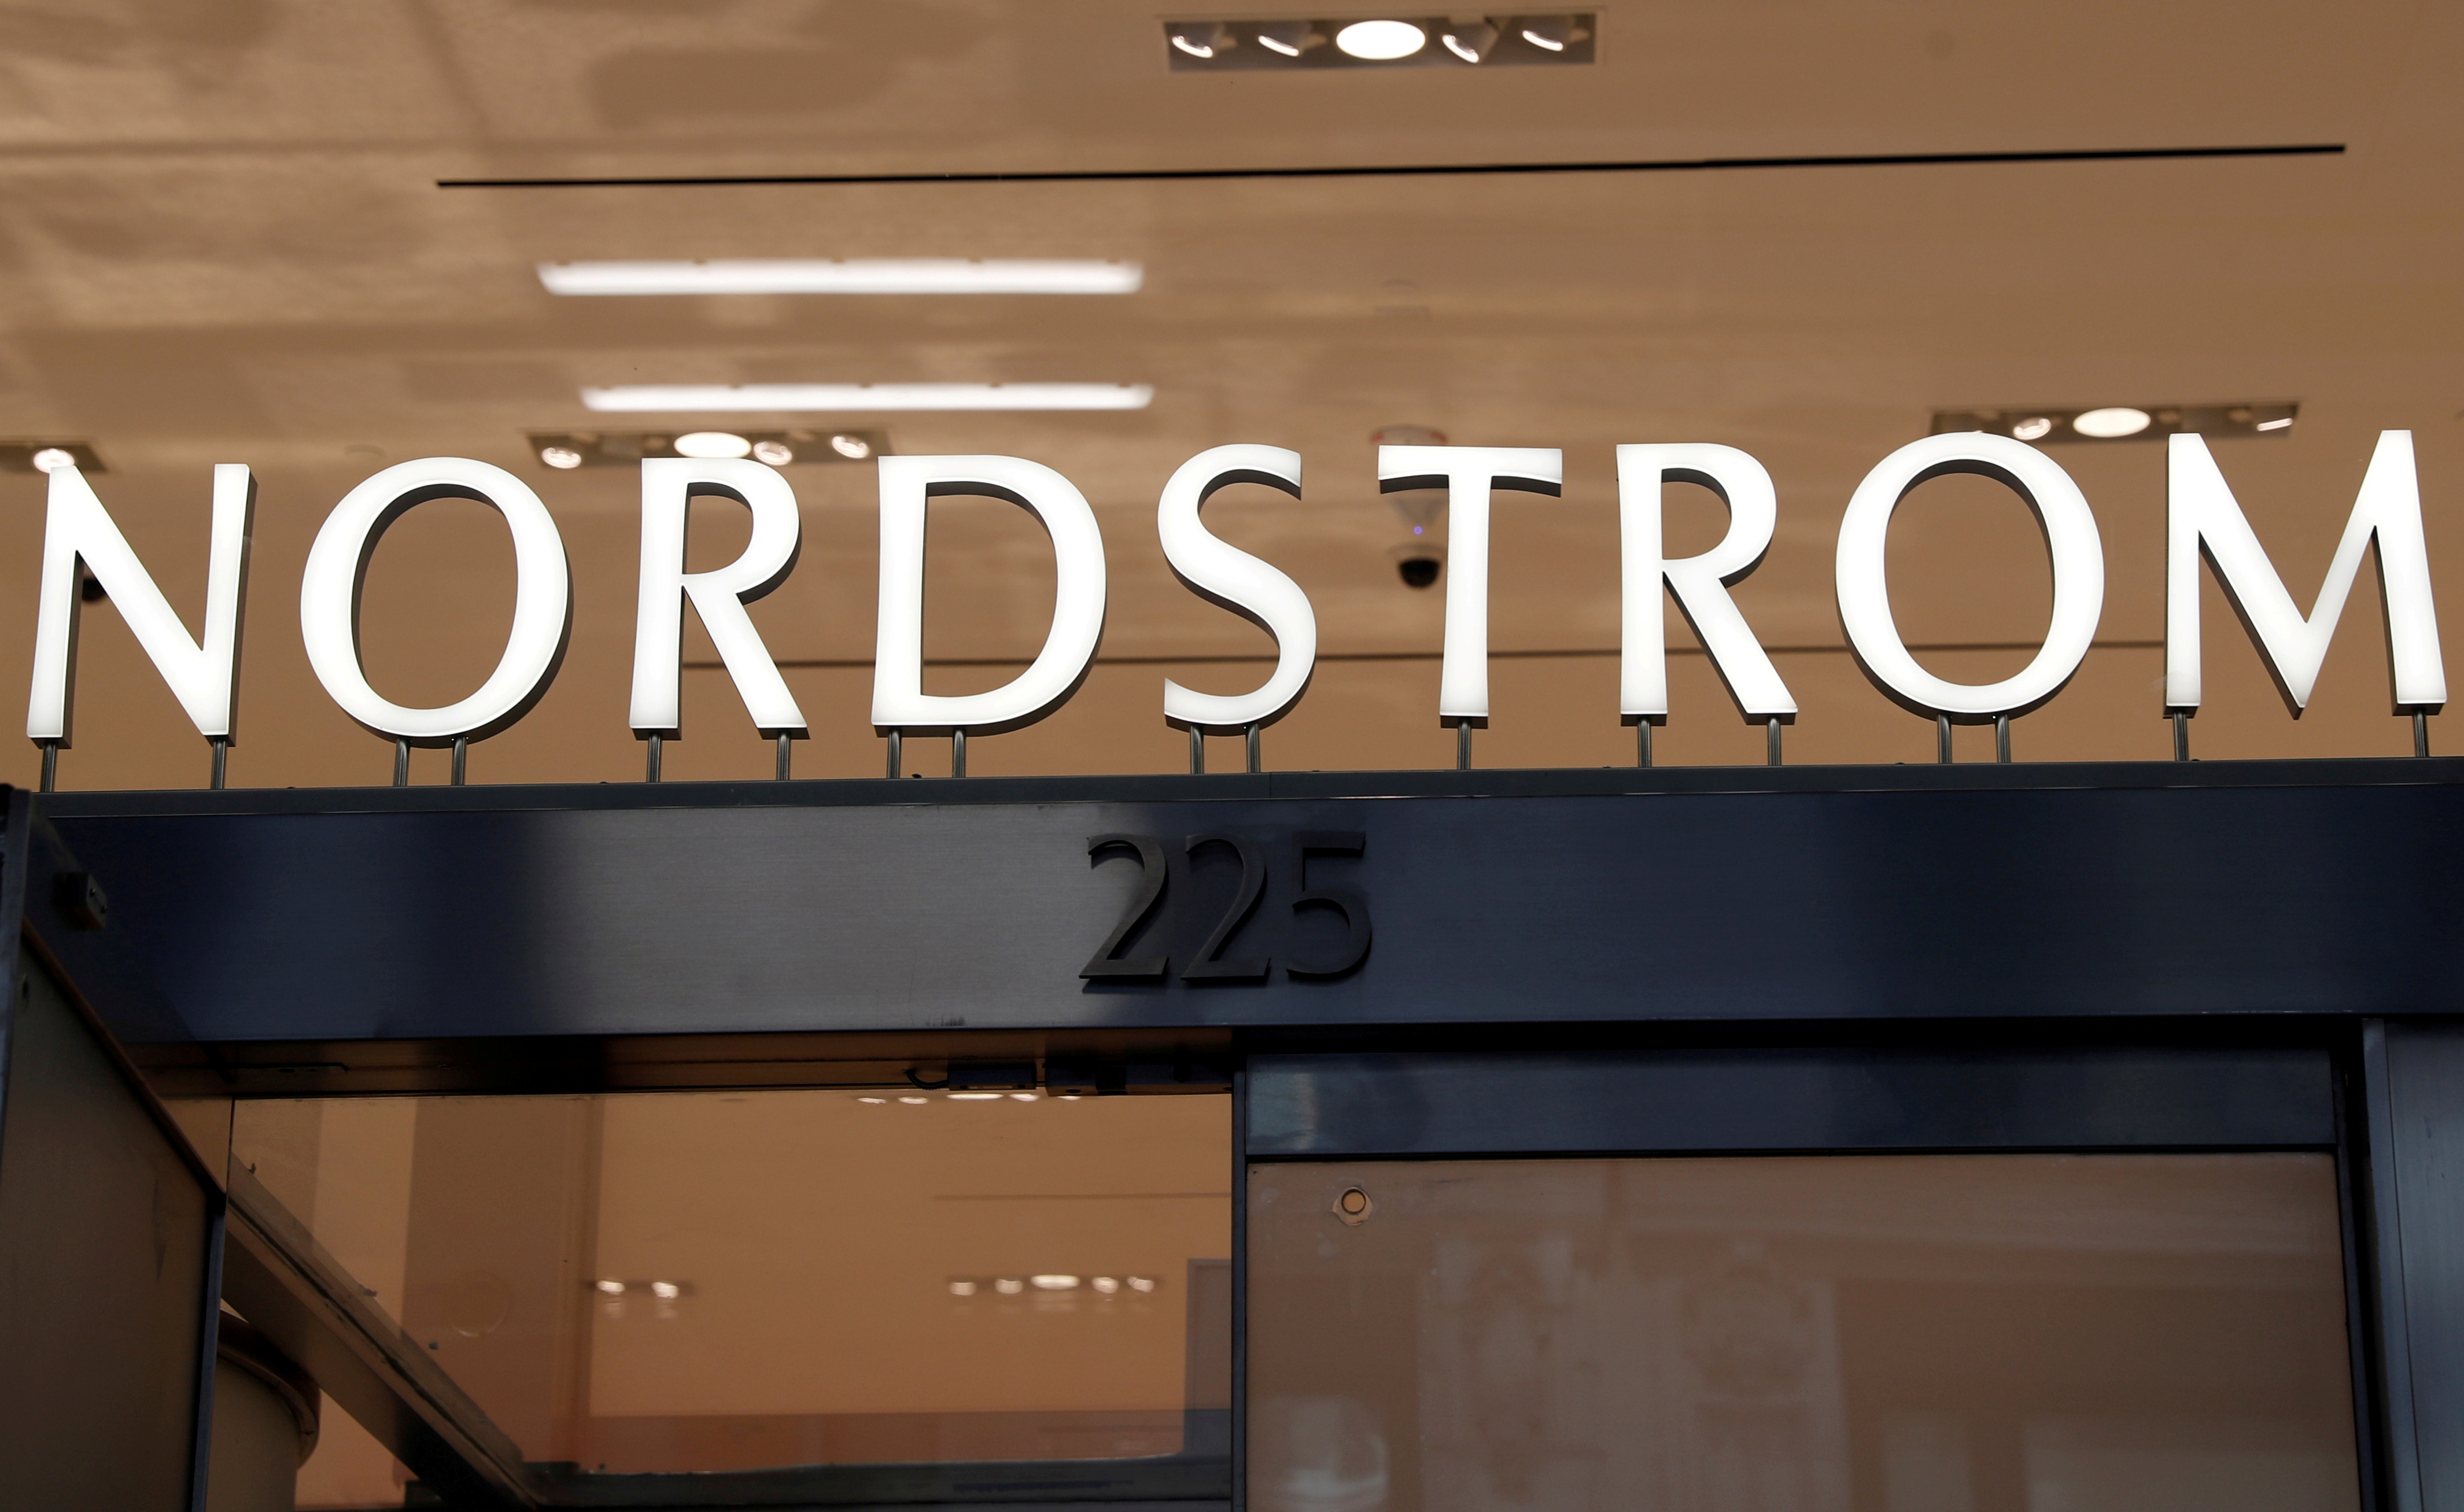 The outside of the Nordstrom flagship store is seen during a media preview in New York, U.S., October 21, 2019. REUTERS/Shannon Stapleton/File Photo